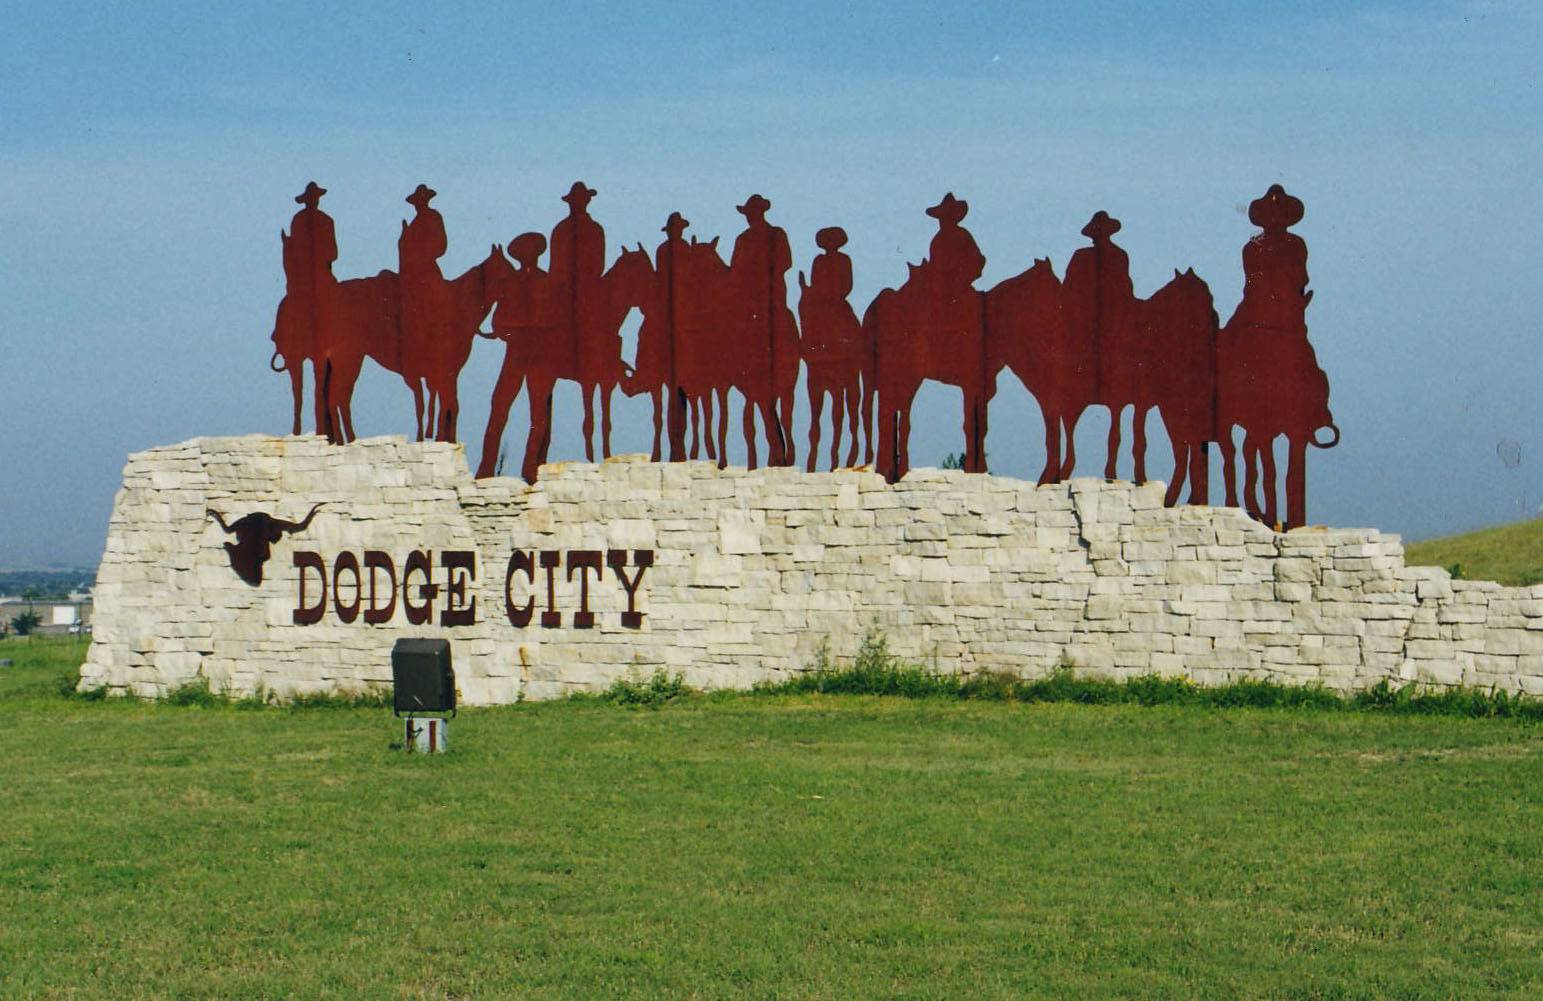 Dodge City RoundUp Pro Rodeo Hall of Fame